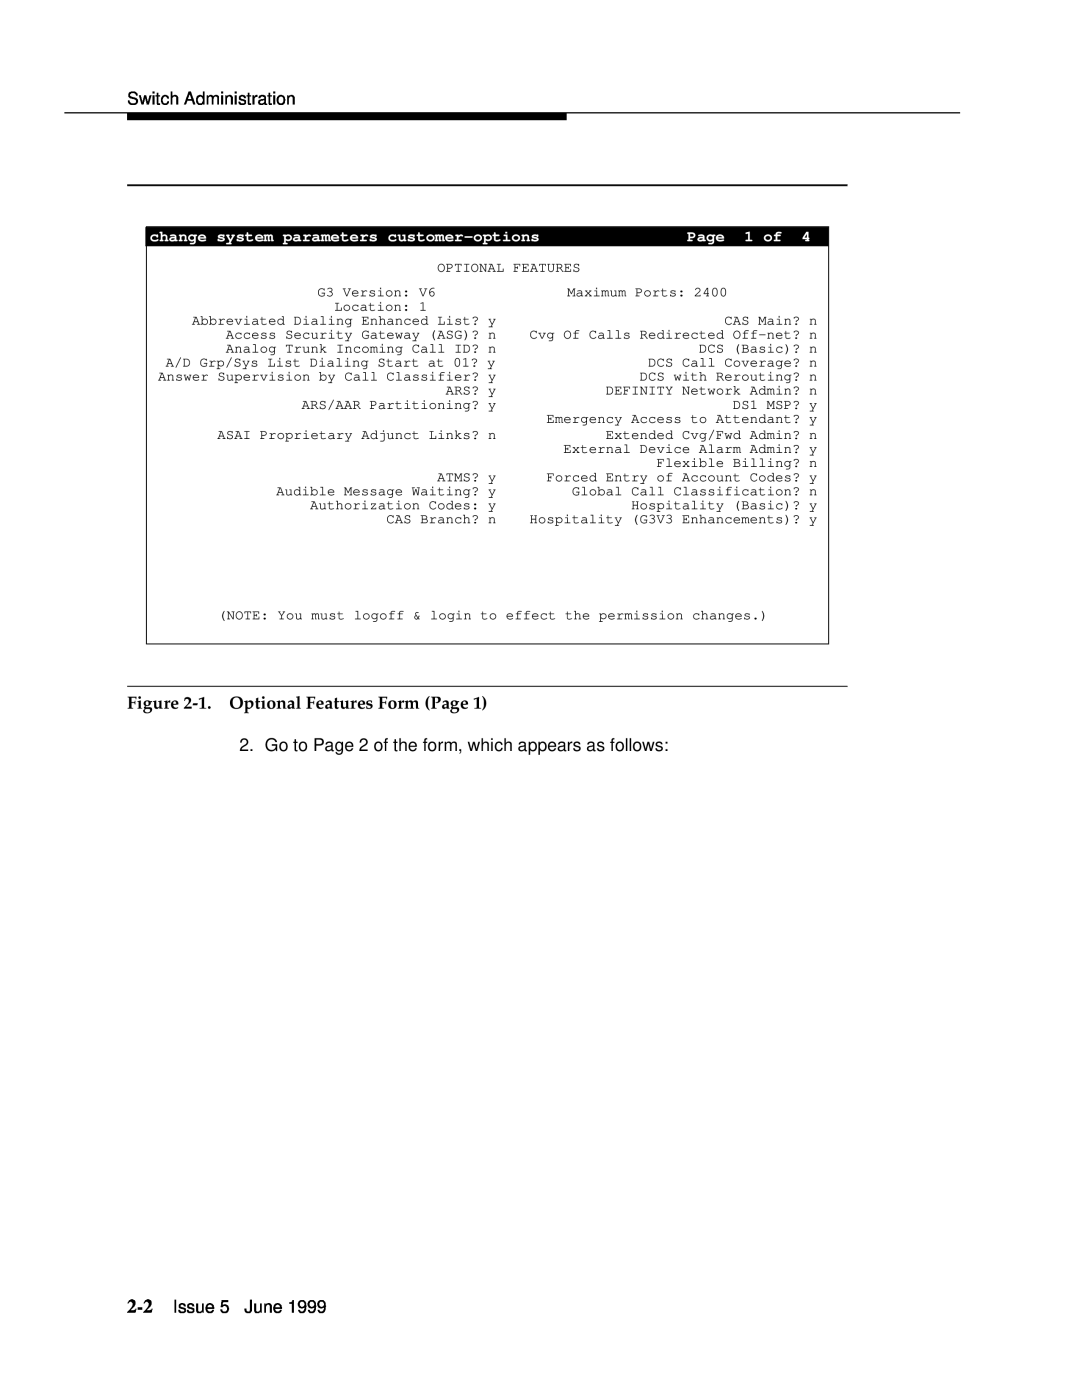 Lucent Technologies 555-232-102 manual 1. Optional Features Form Page, Switch Administration, Issue 5 June, Page 1 of 